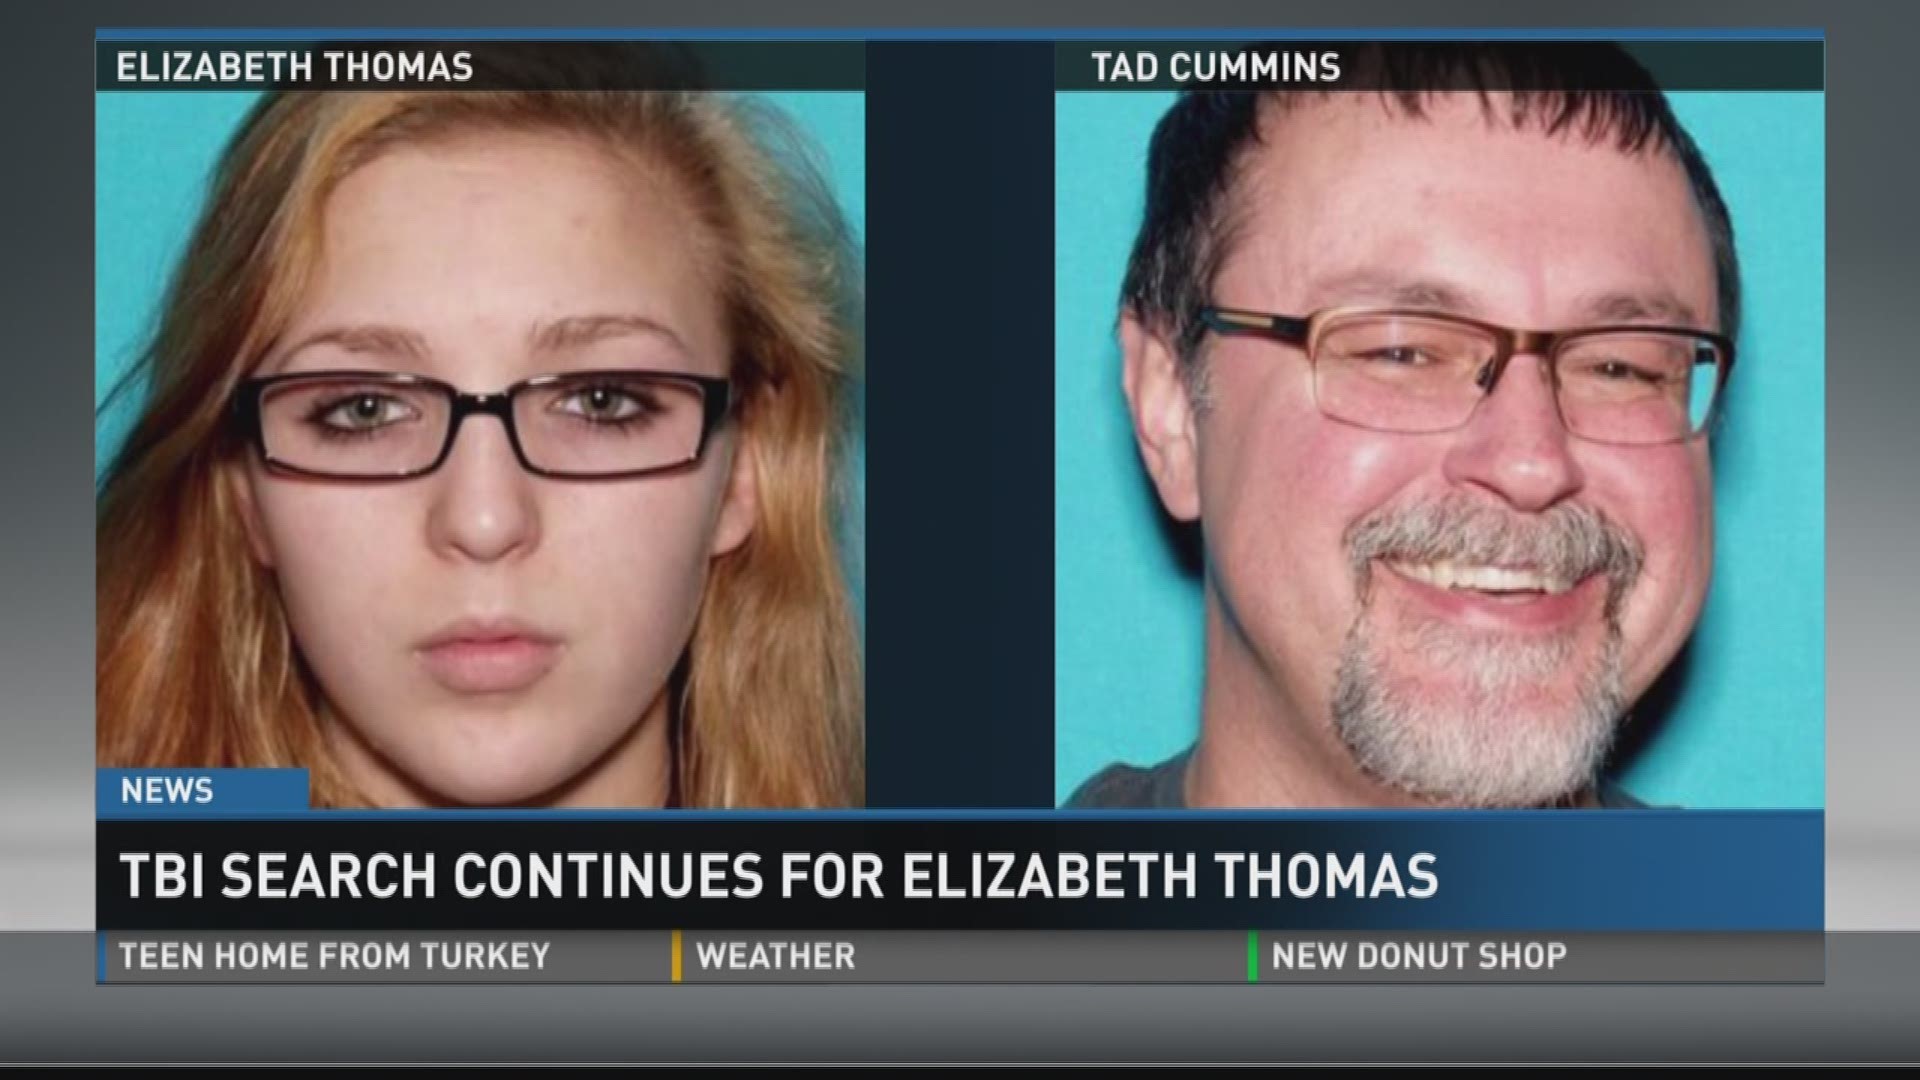 Elizabeth Thomas' older sister, Sarah Thomas, says her sister hasn't reached out to her since she disappeared on March 13. However, Elizabeth appears to have updated her Instagram biography.